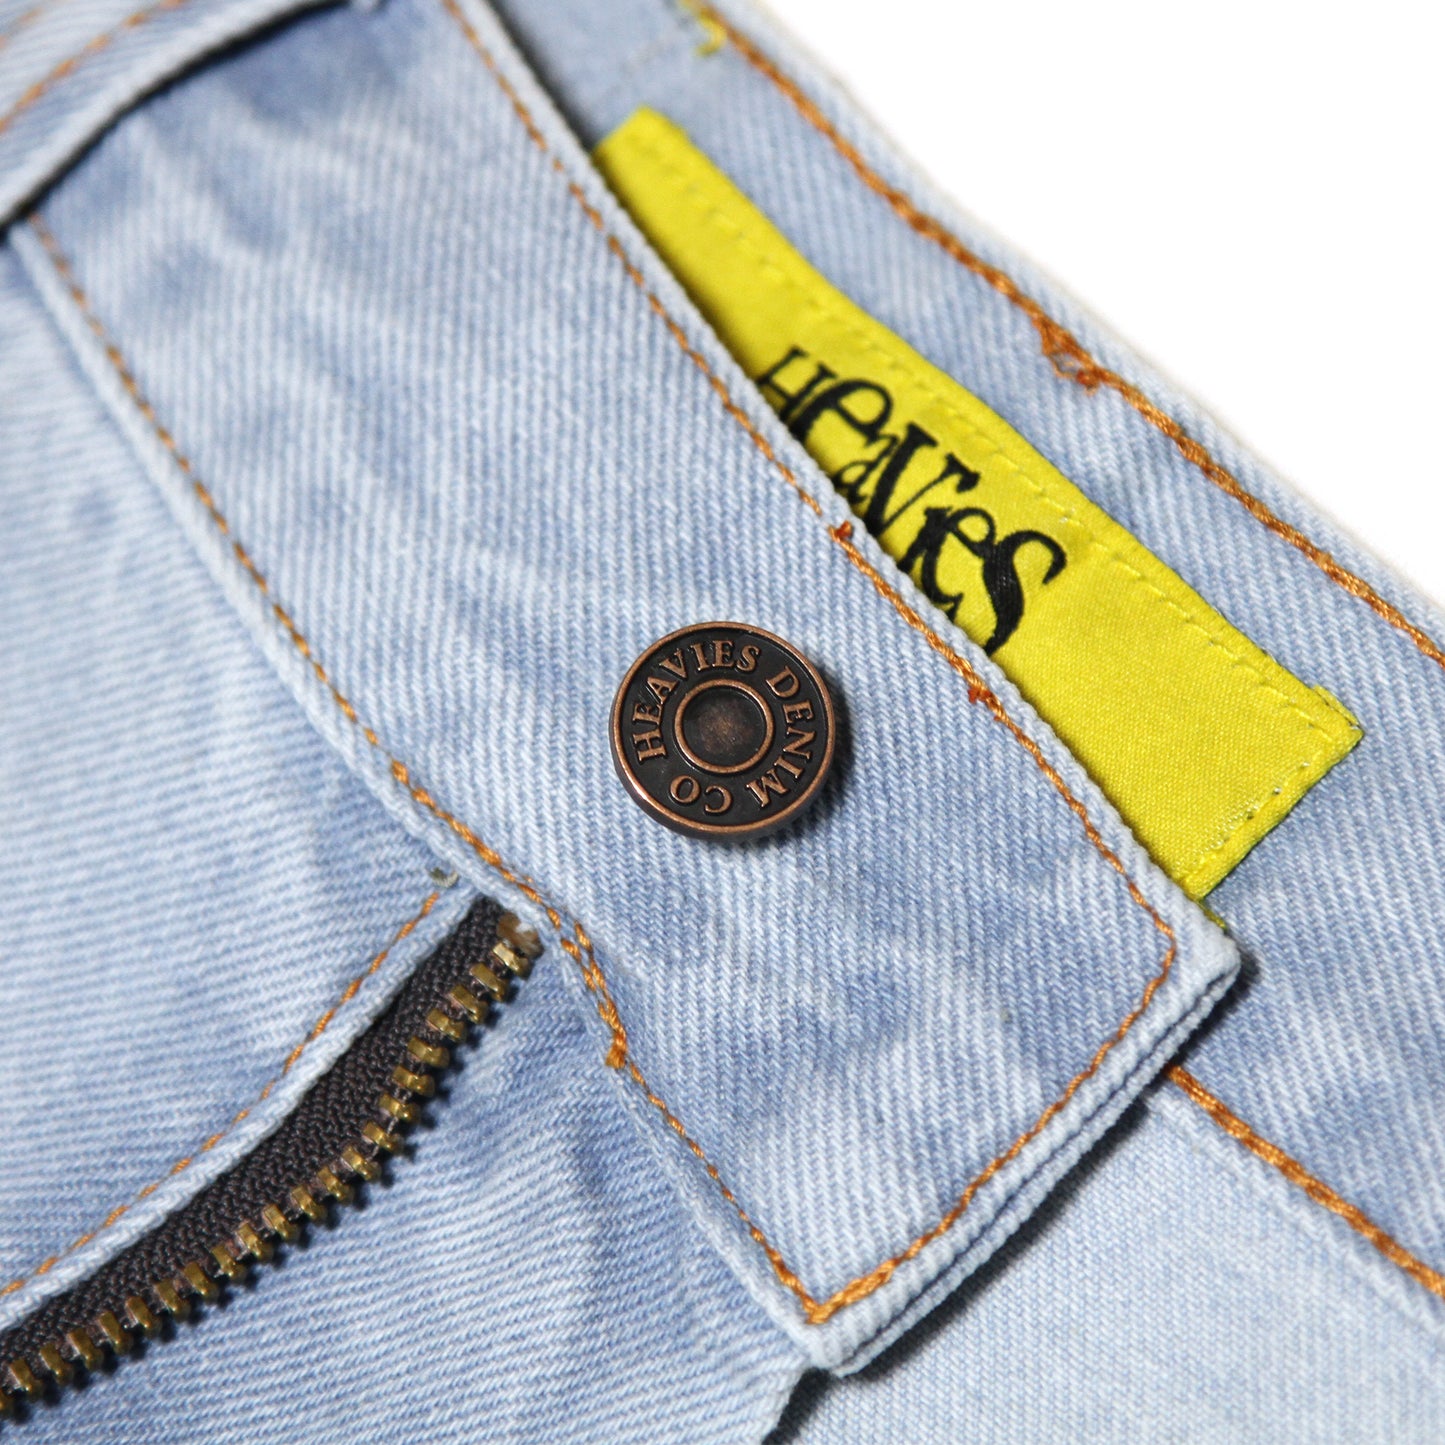 HEAVIES - 02 Jeans/Washed Light Blue